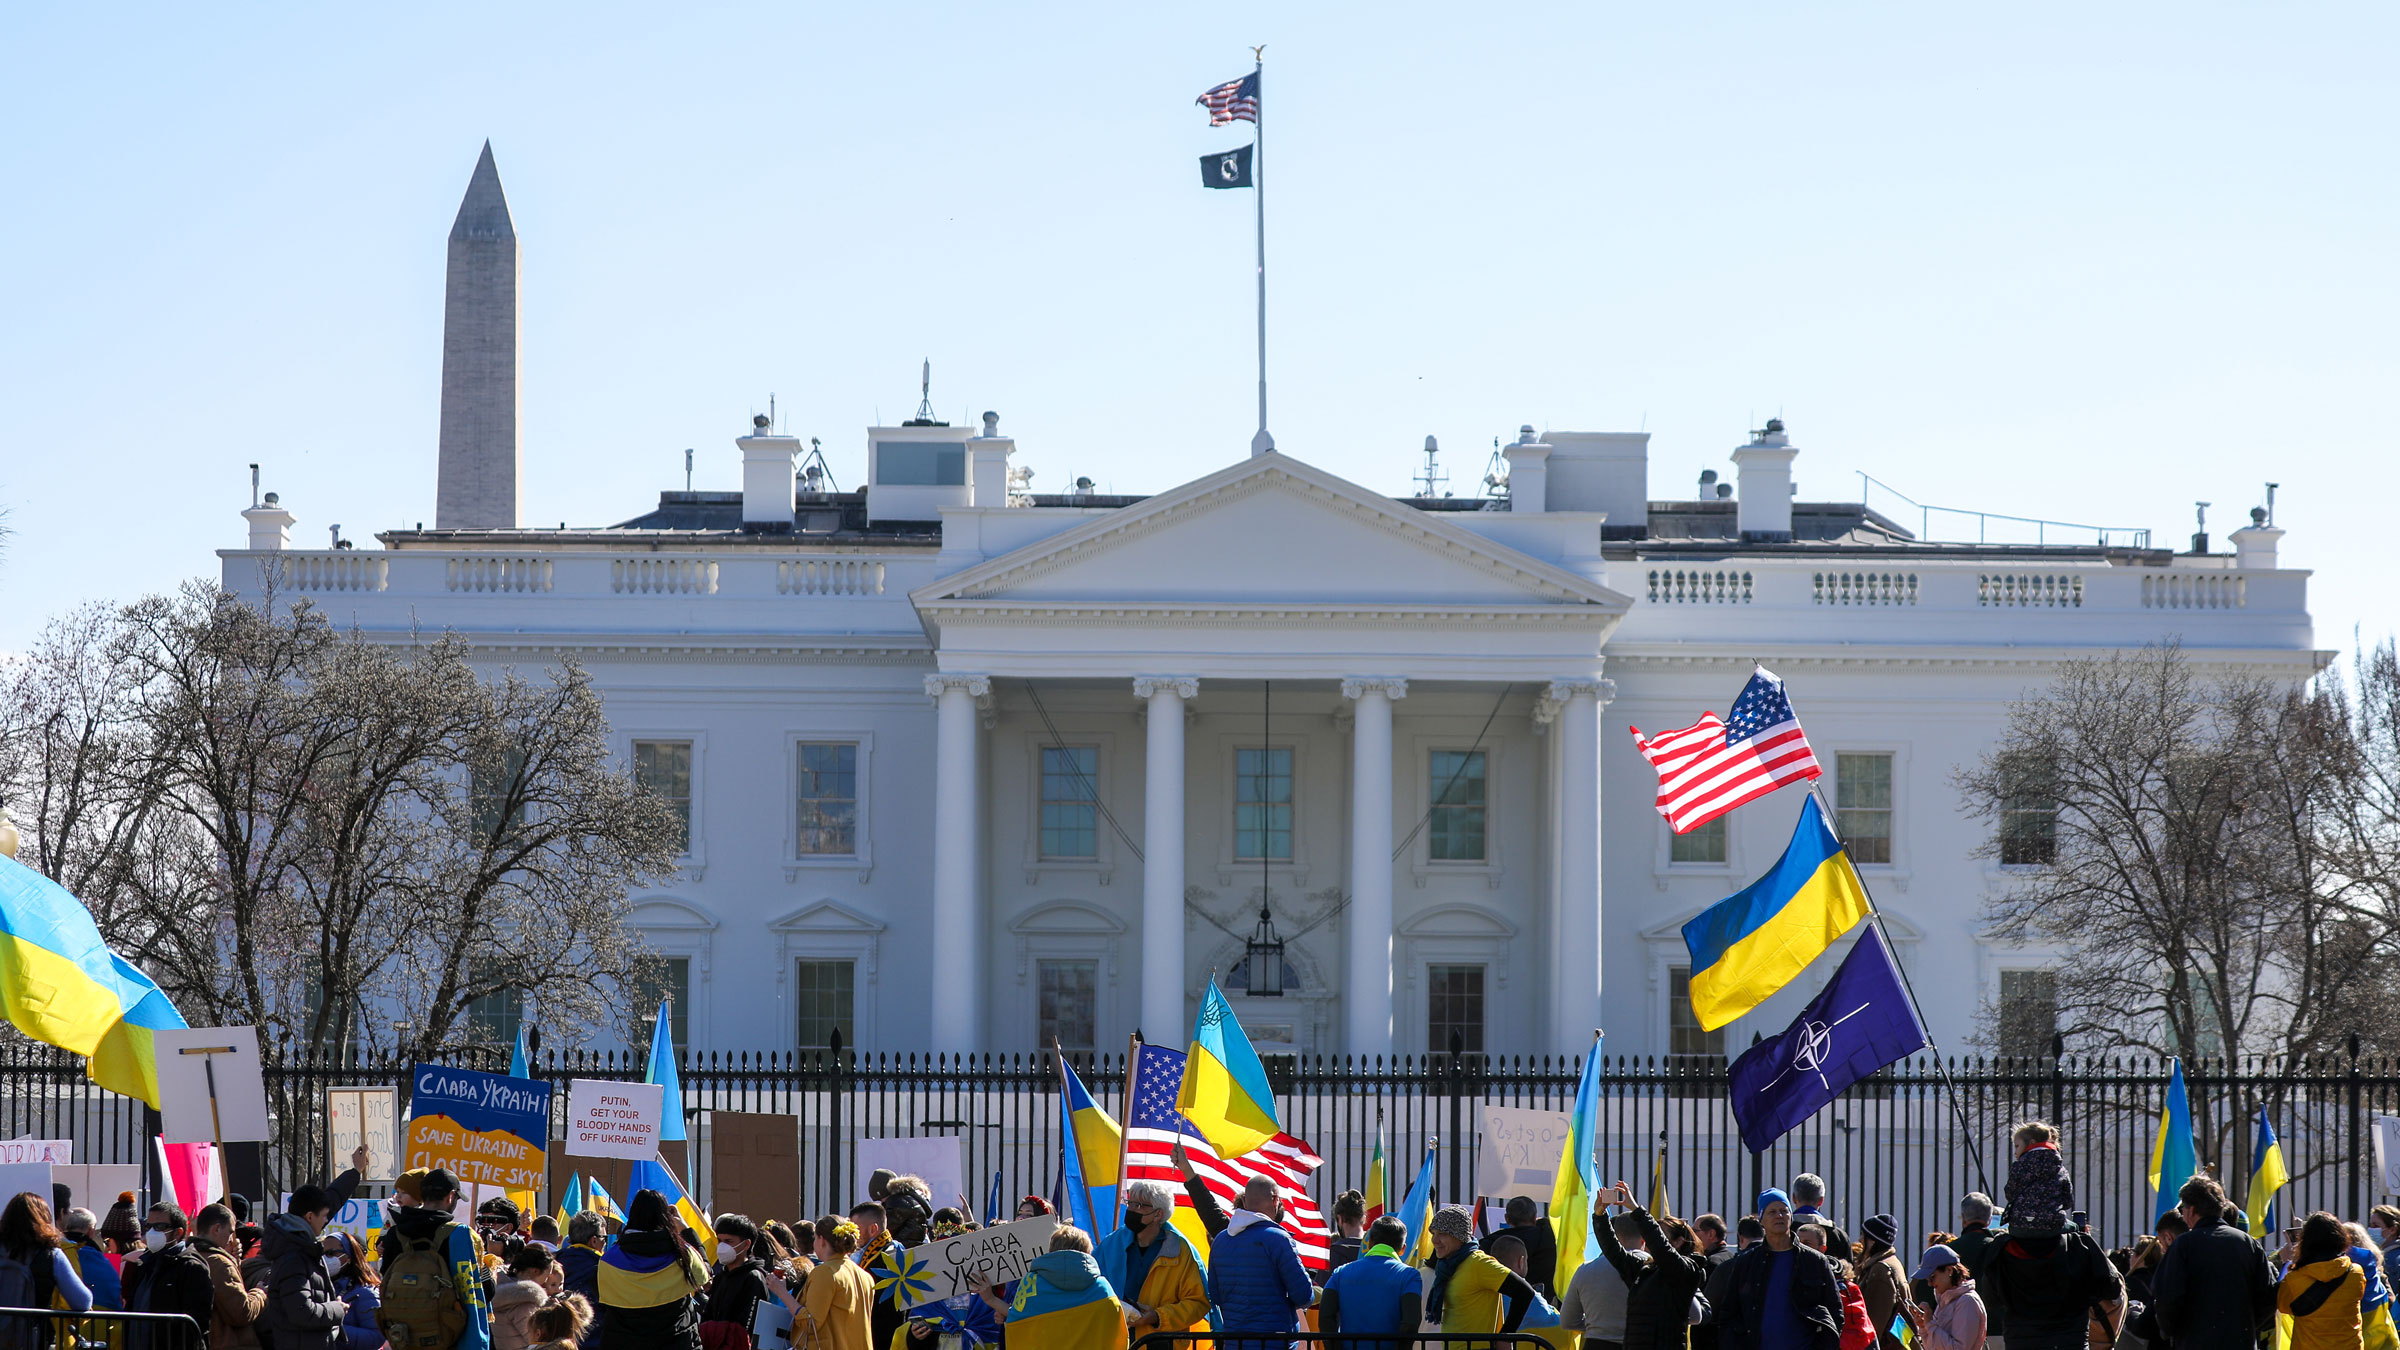 People gather in front of the White House on February 27 to protest Russia's invasion of Ukraine.